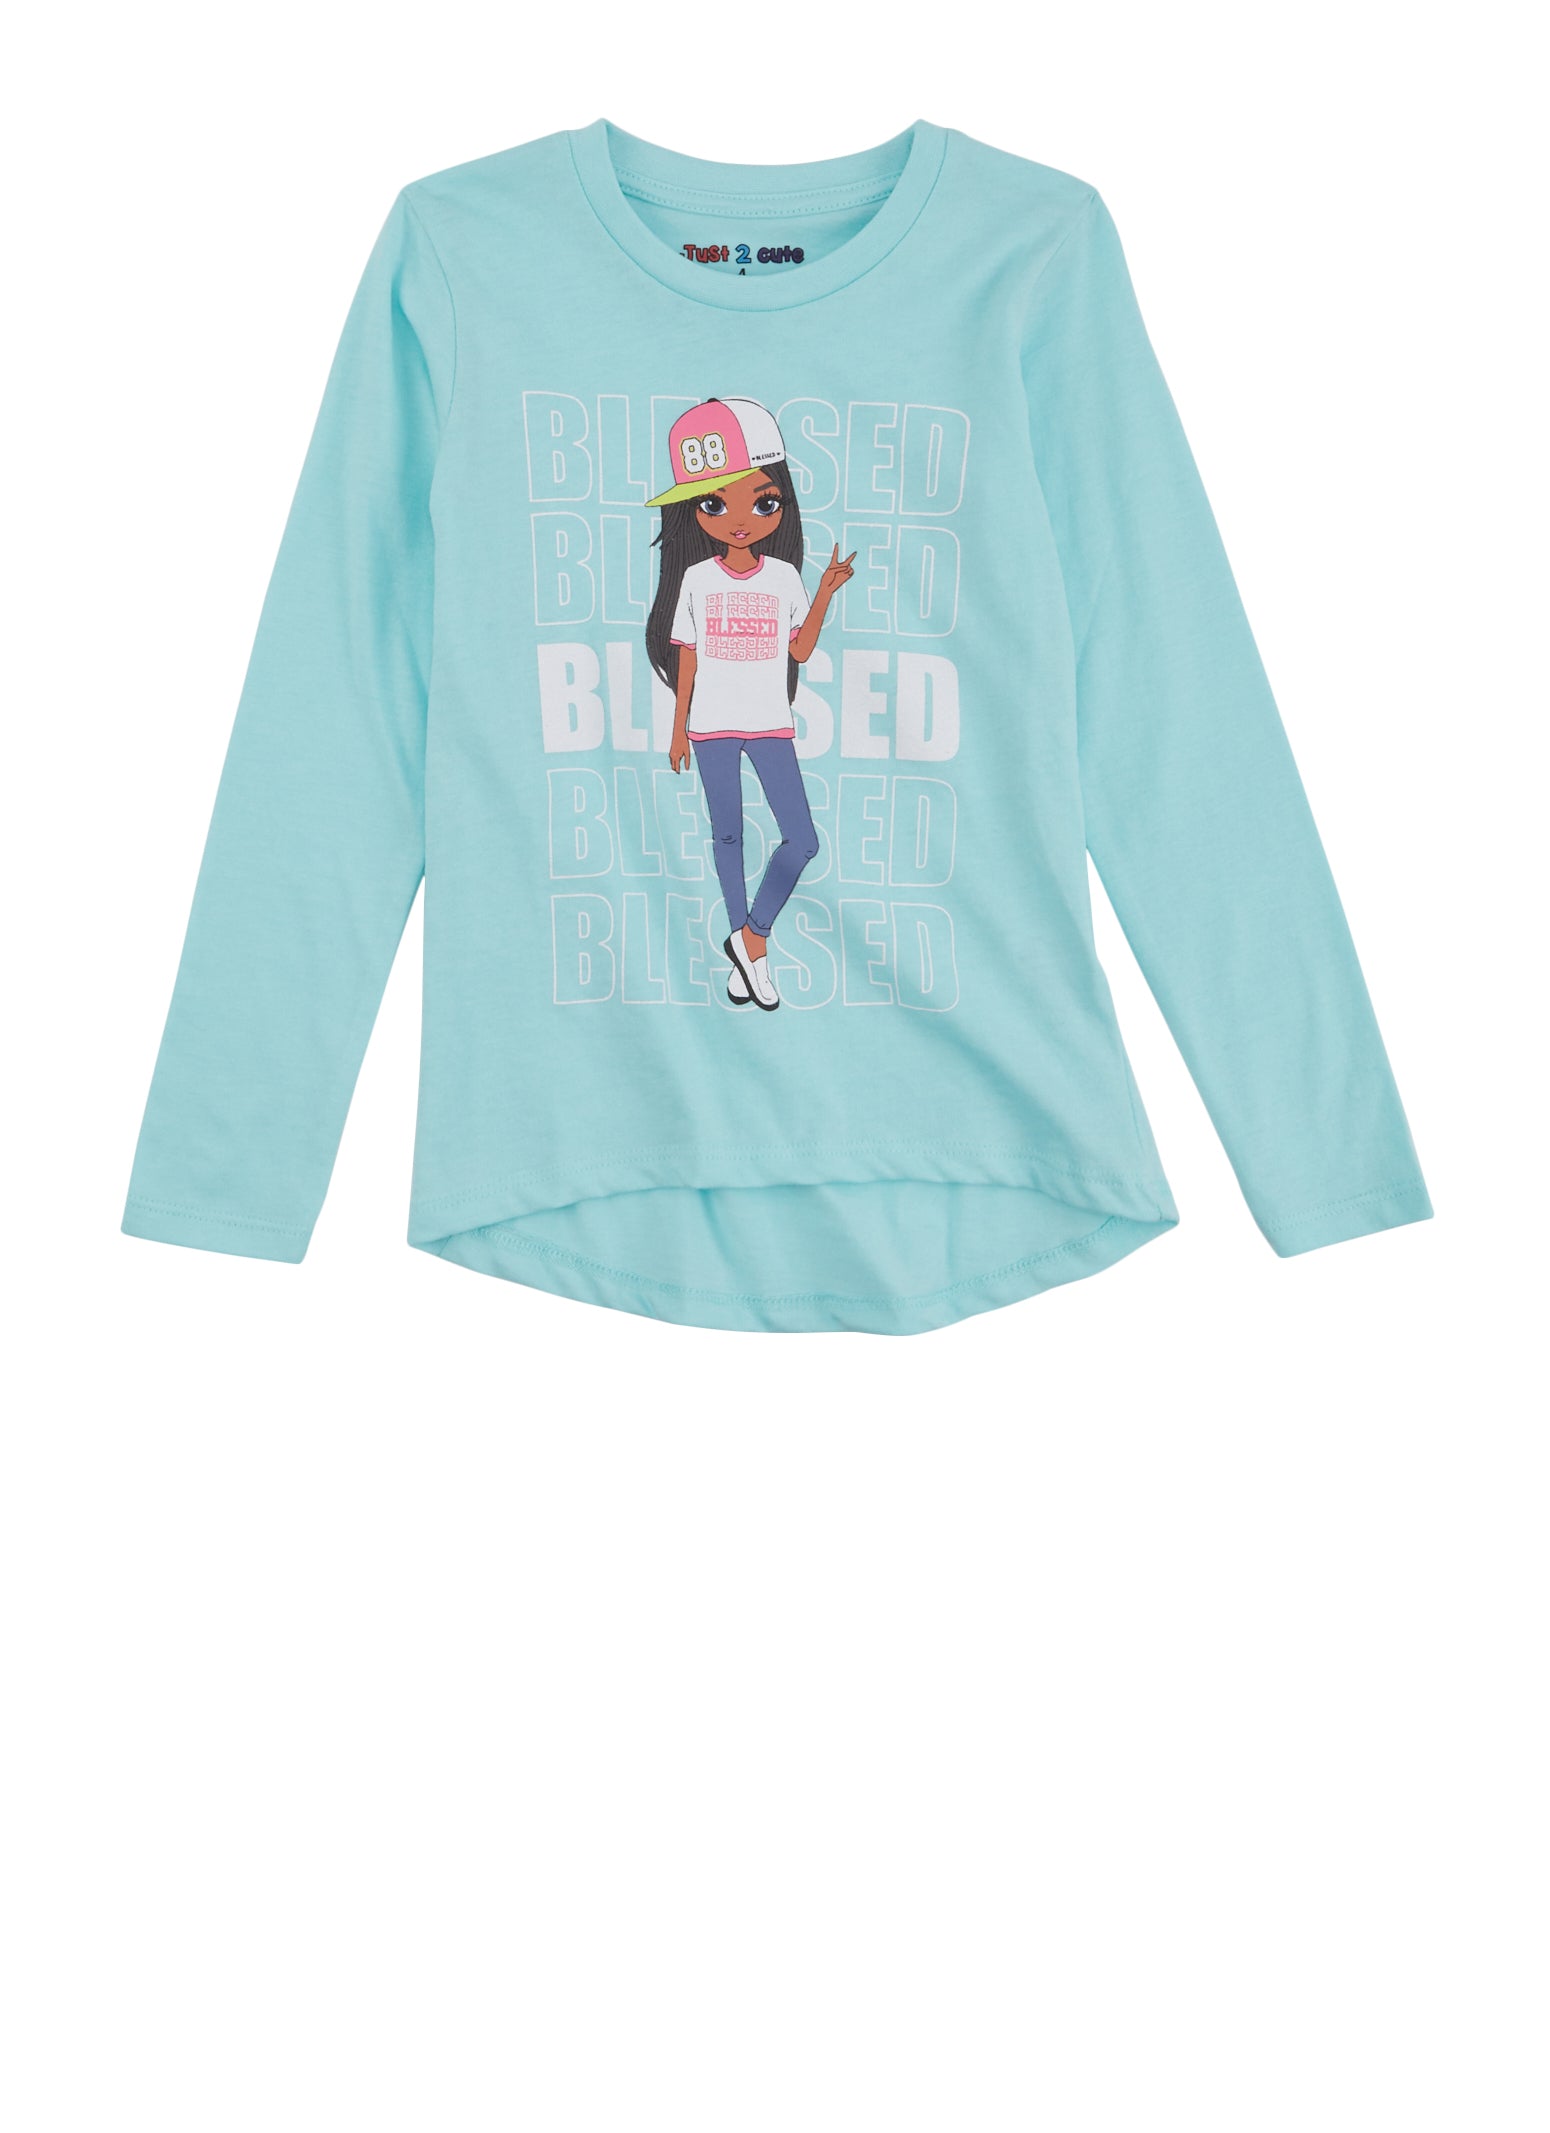 Little Girls Blessed Glitter Graphic Tee, Blue, Size 5-6